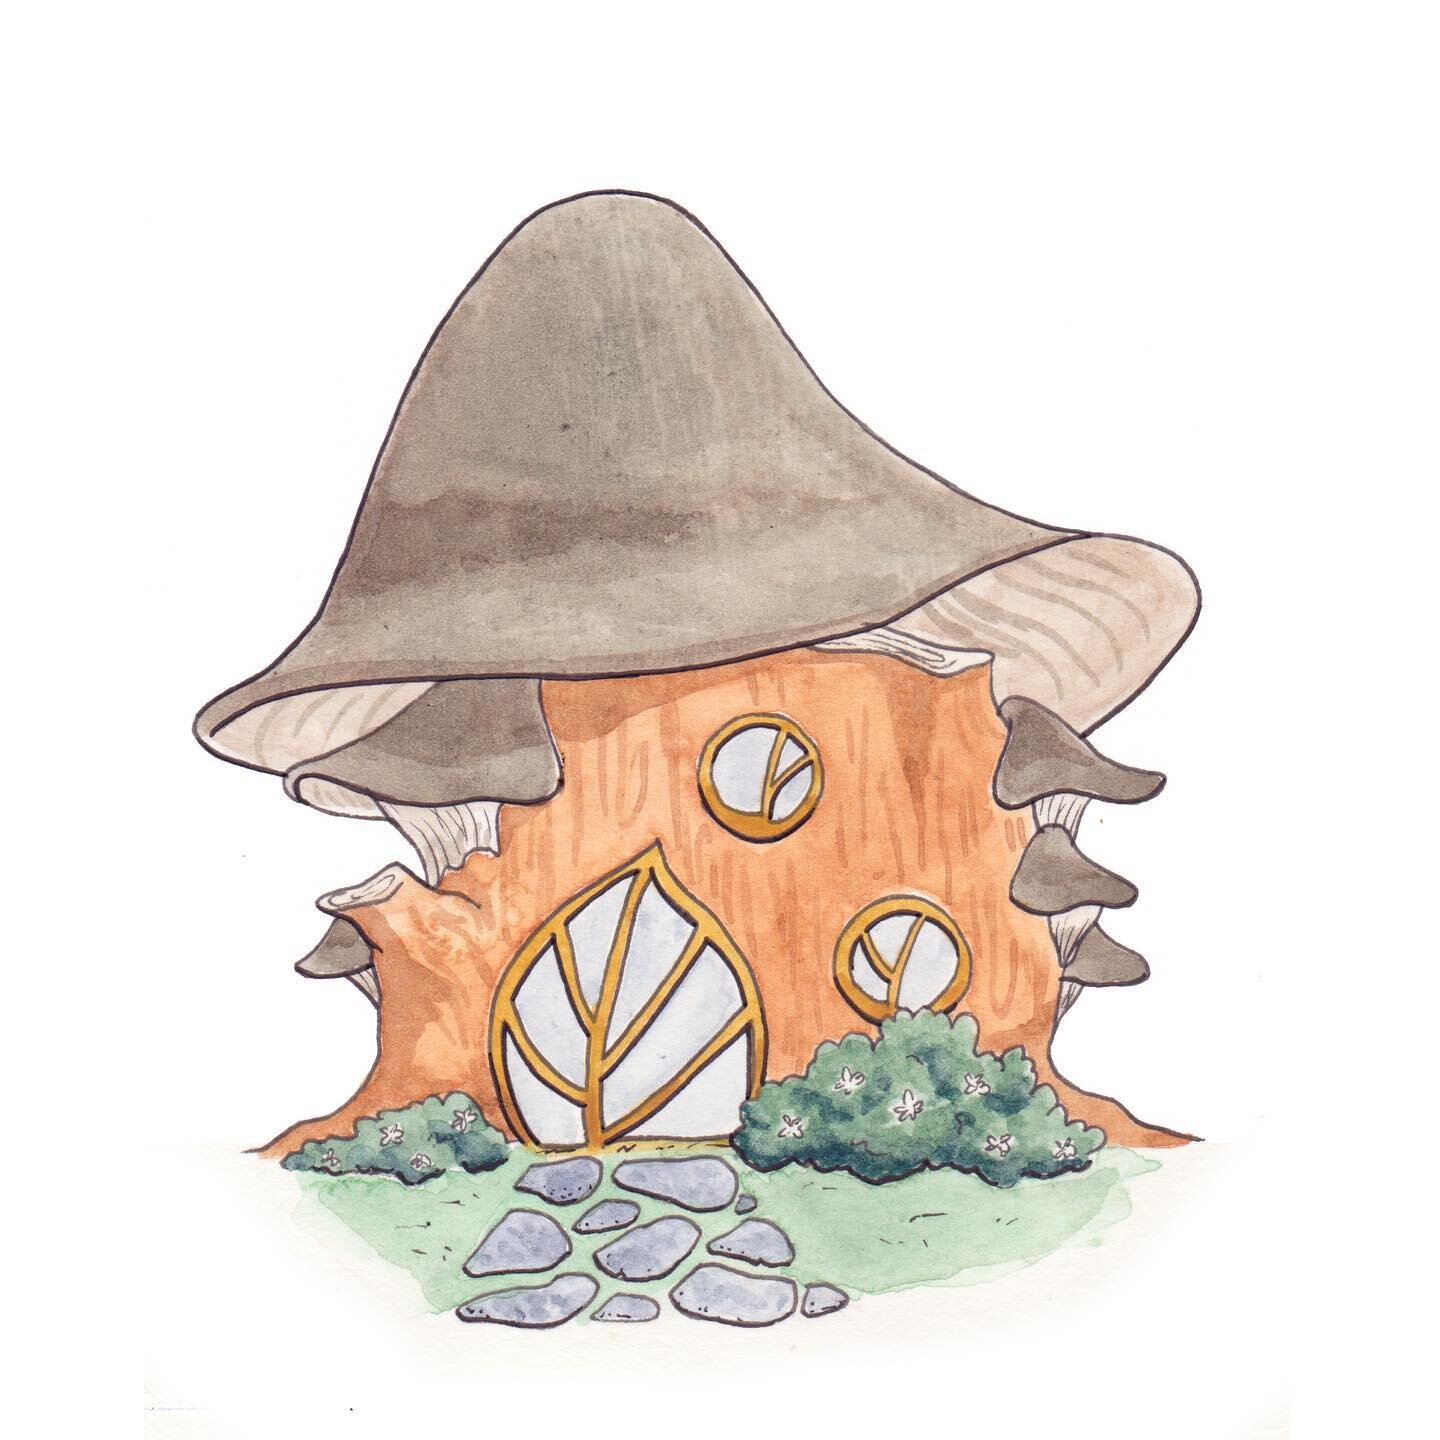 By special request, 2 new &ldquo;creating a fairy house&rdquo; videos exist (#linkinbio) and I couldn&rsquo;t be happier for the mental break 🧘&zwj;♀️ @sayoskie - here&rsquo;s a housing option for that little paper fairy Aela so beautifully crafted!